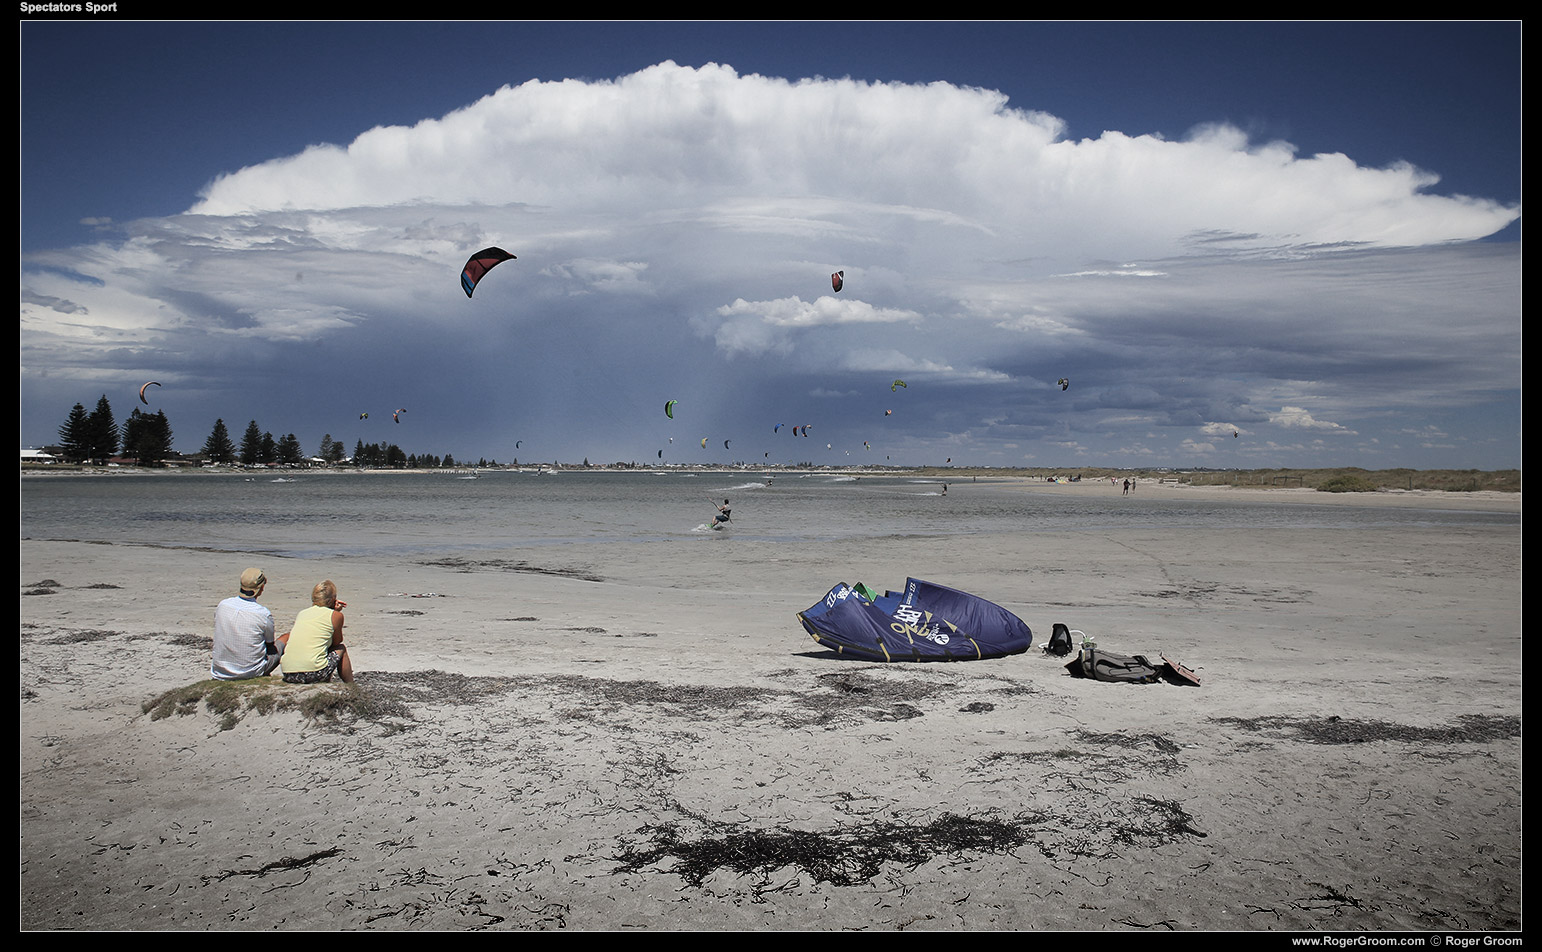 Spectator Sport - The Pond at Safety Bay, with storm clouds in the distance and kite surfers.